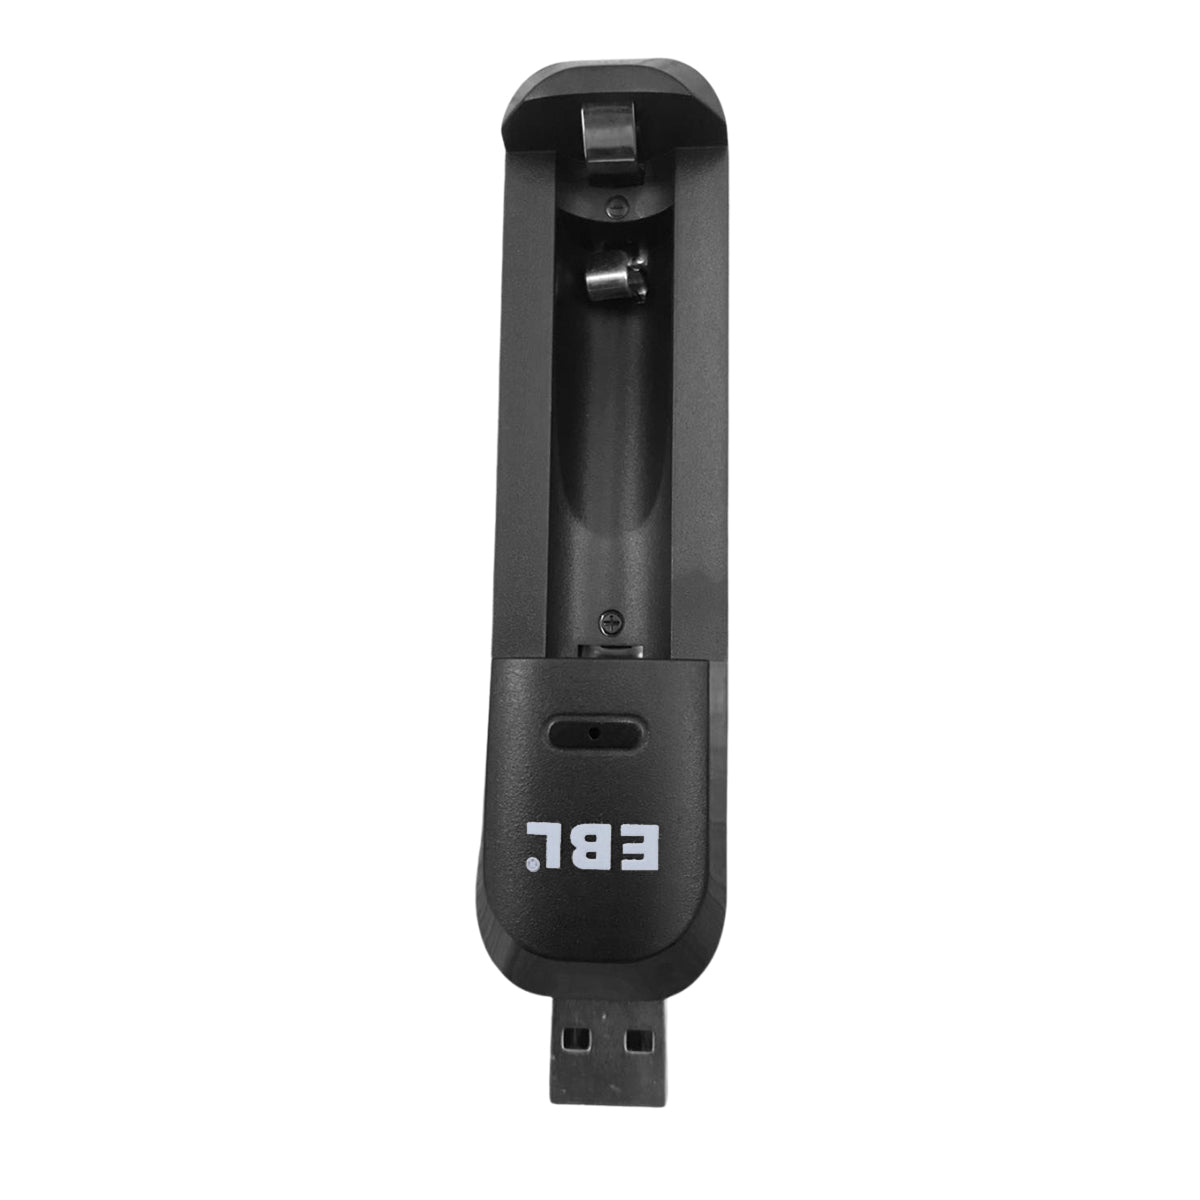 EBL CDMYC0006A Smart LED AA / AAAA Battery Charger with 5V USB Type-A Plug, and Built In Over Current Protection for Li-Ion and NiMH Batteries